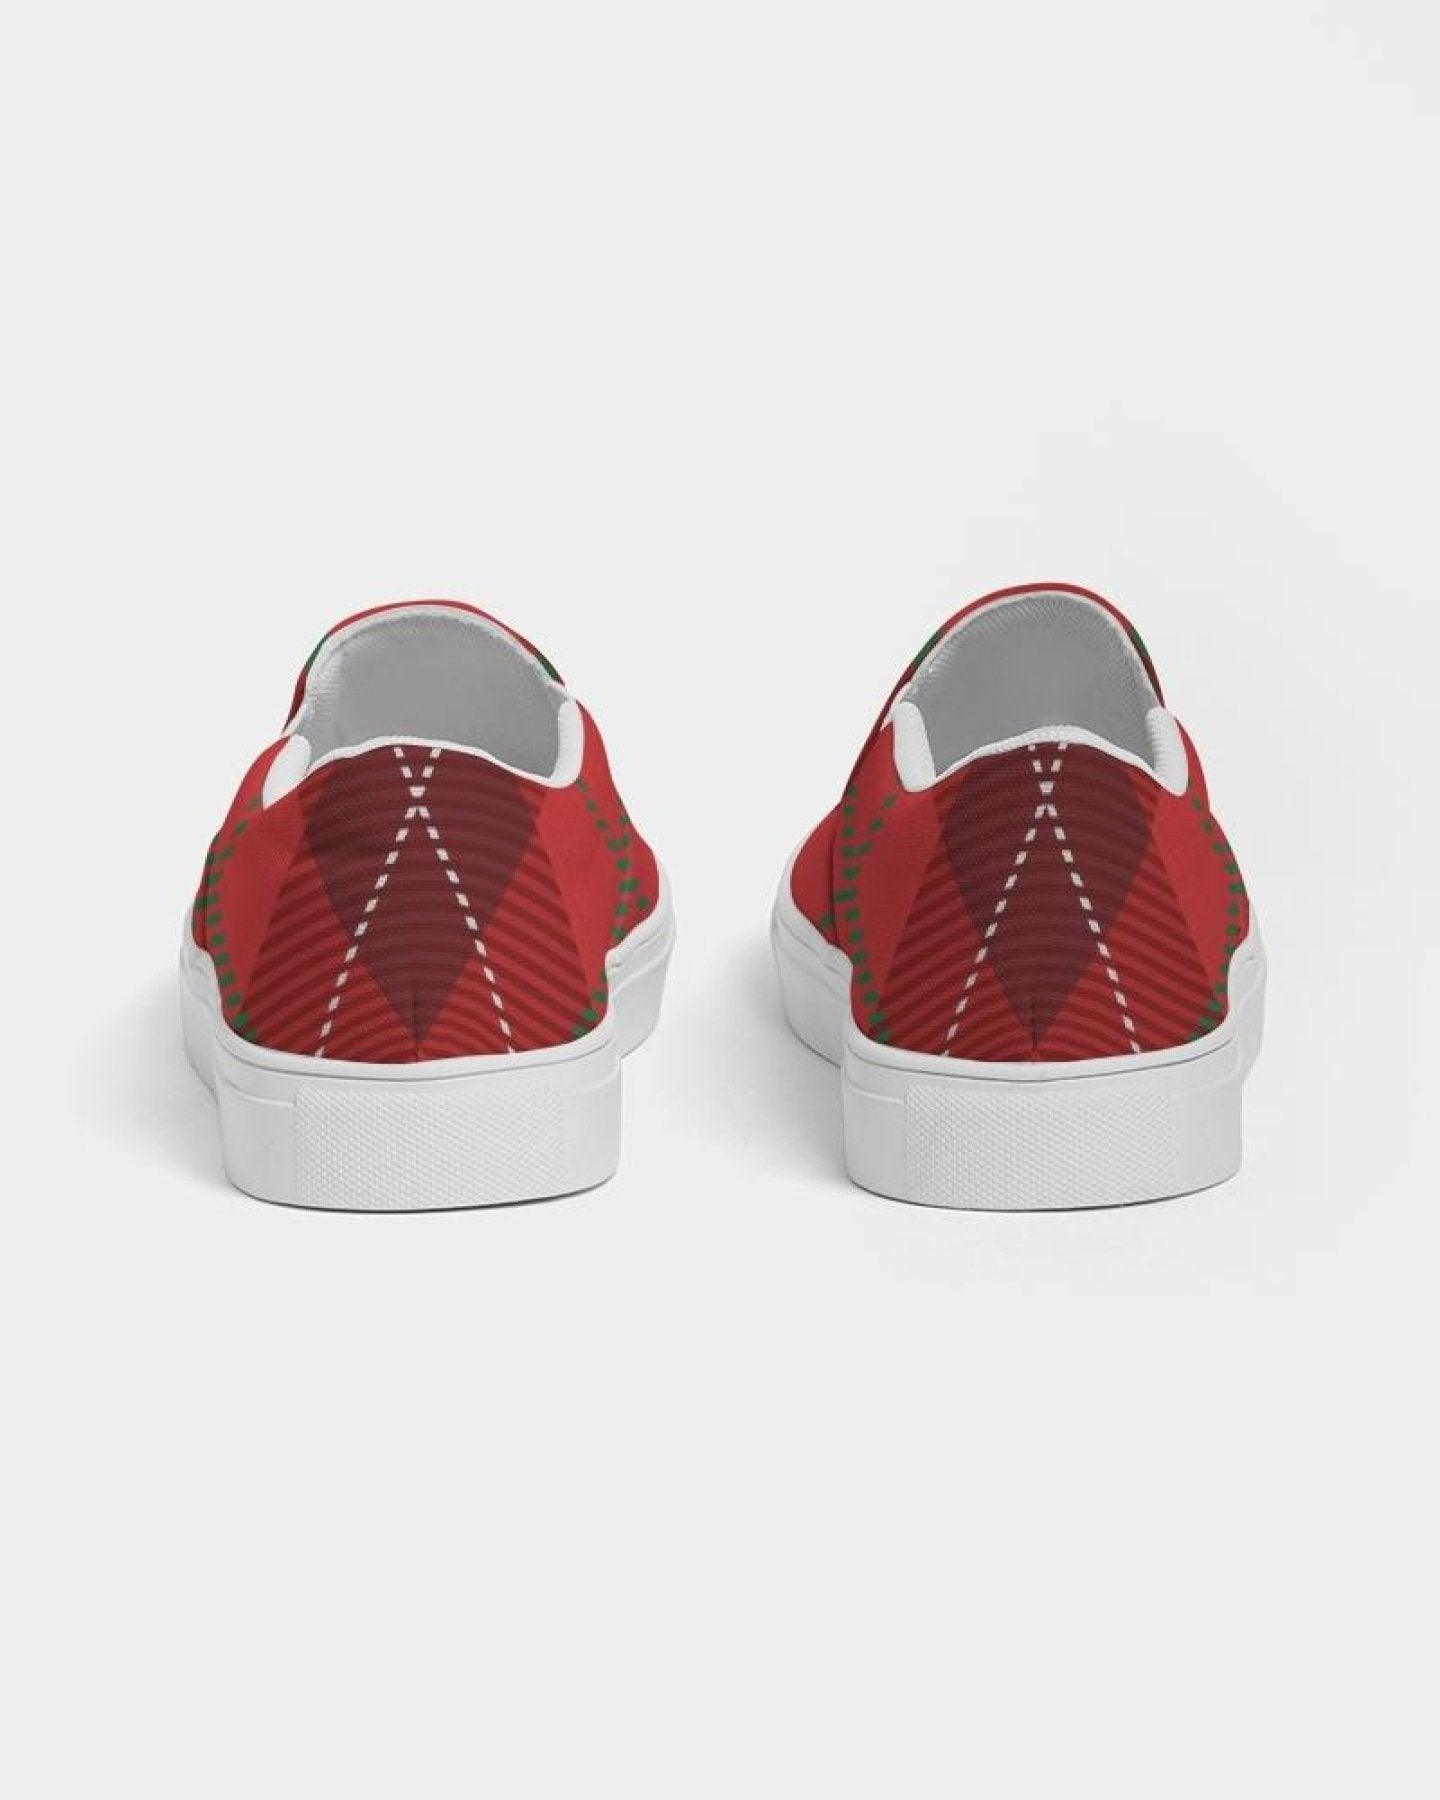 Womens Sneakers - Red Plaid Canvas Sports Shoes / Slip-on - VirtuousWares:Global